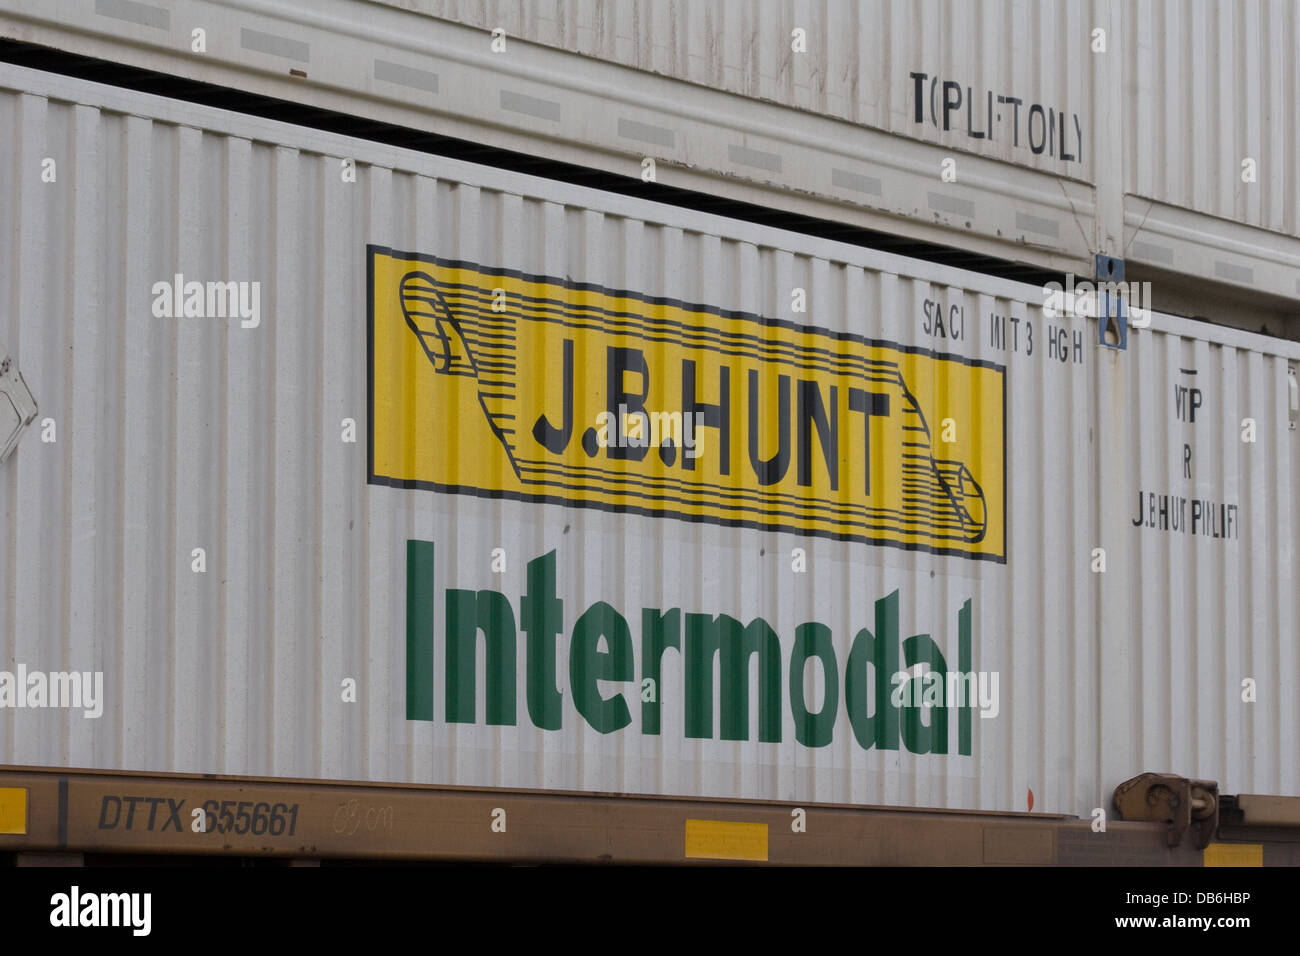 J B Hunt corporate logo on freight container on intermodal Freight ...